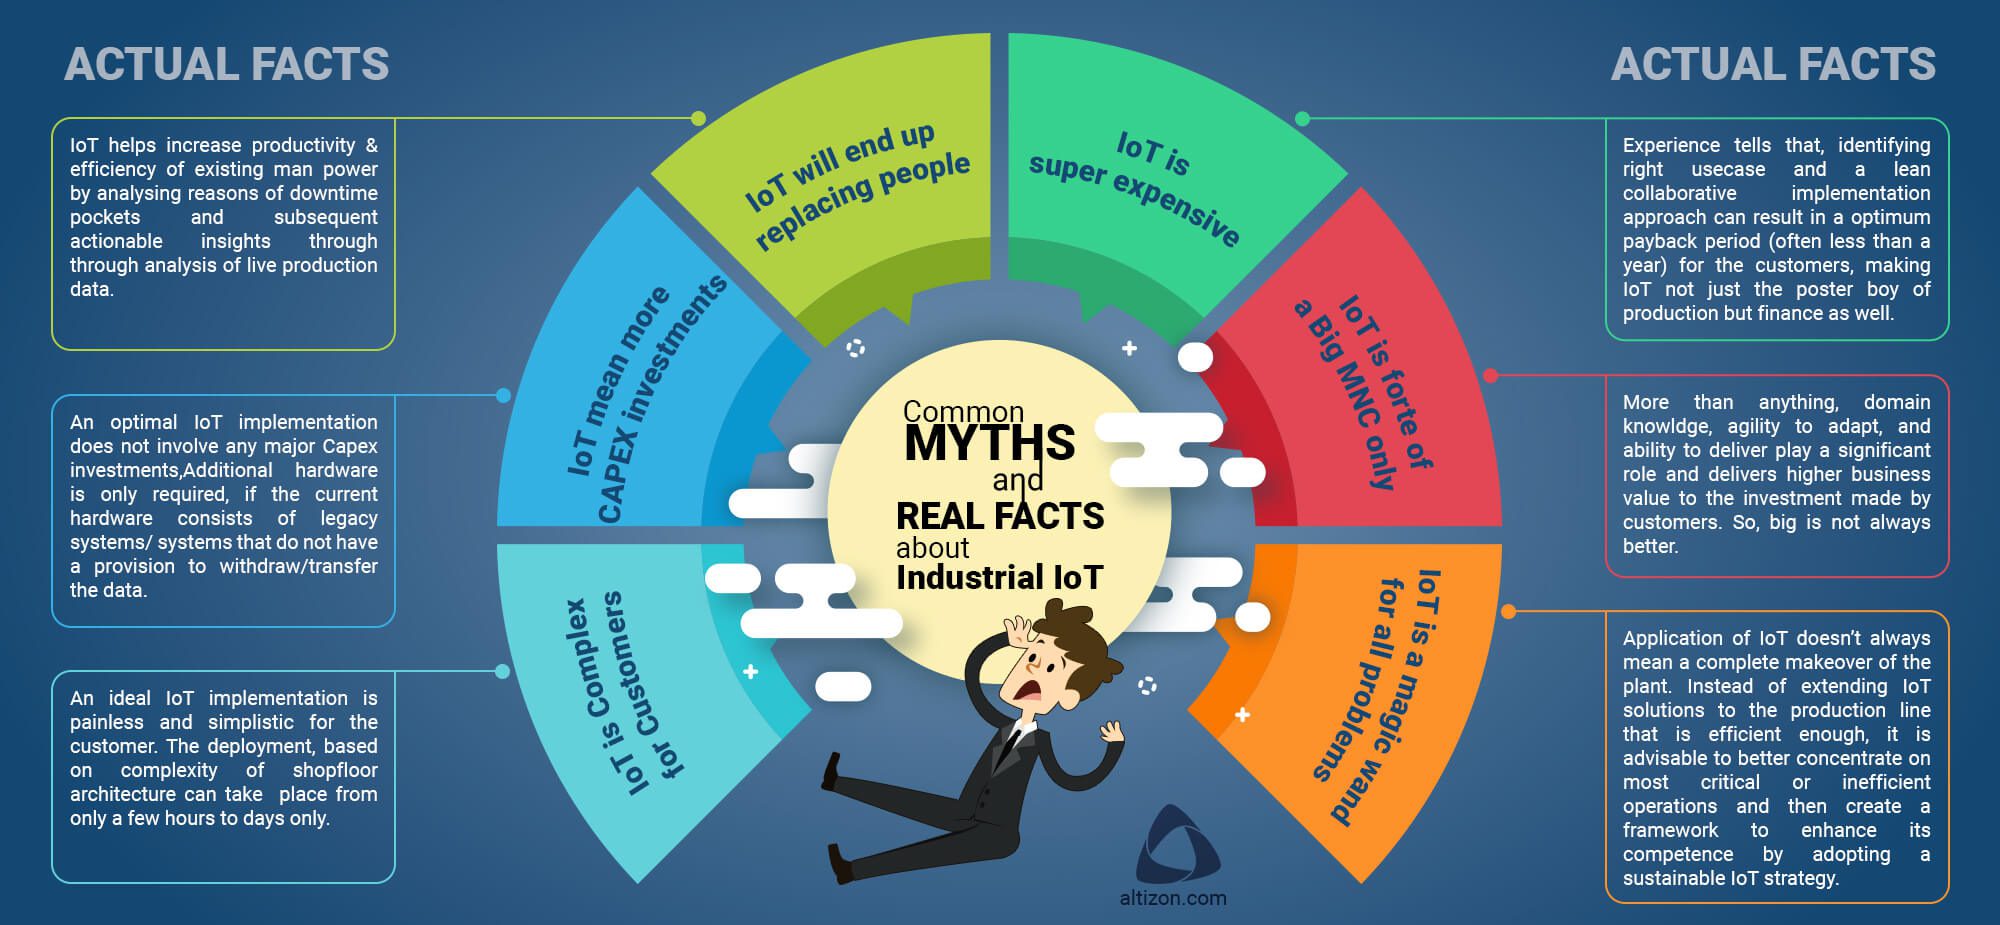 Myths and Industrial IoT Implementations